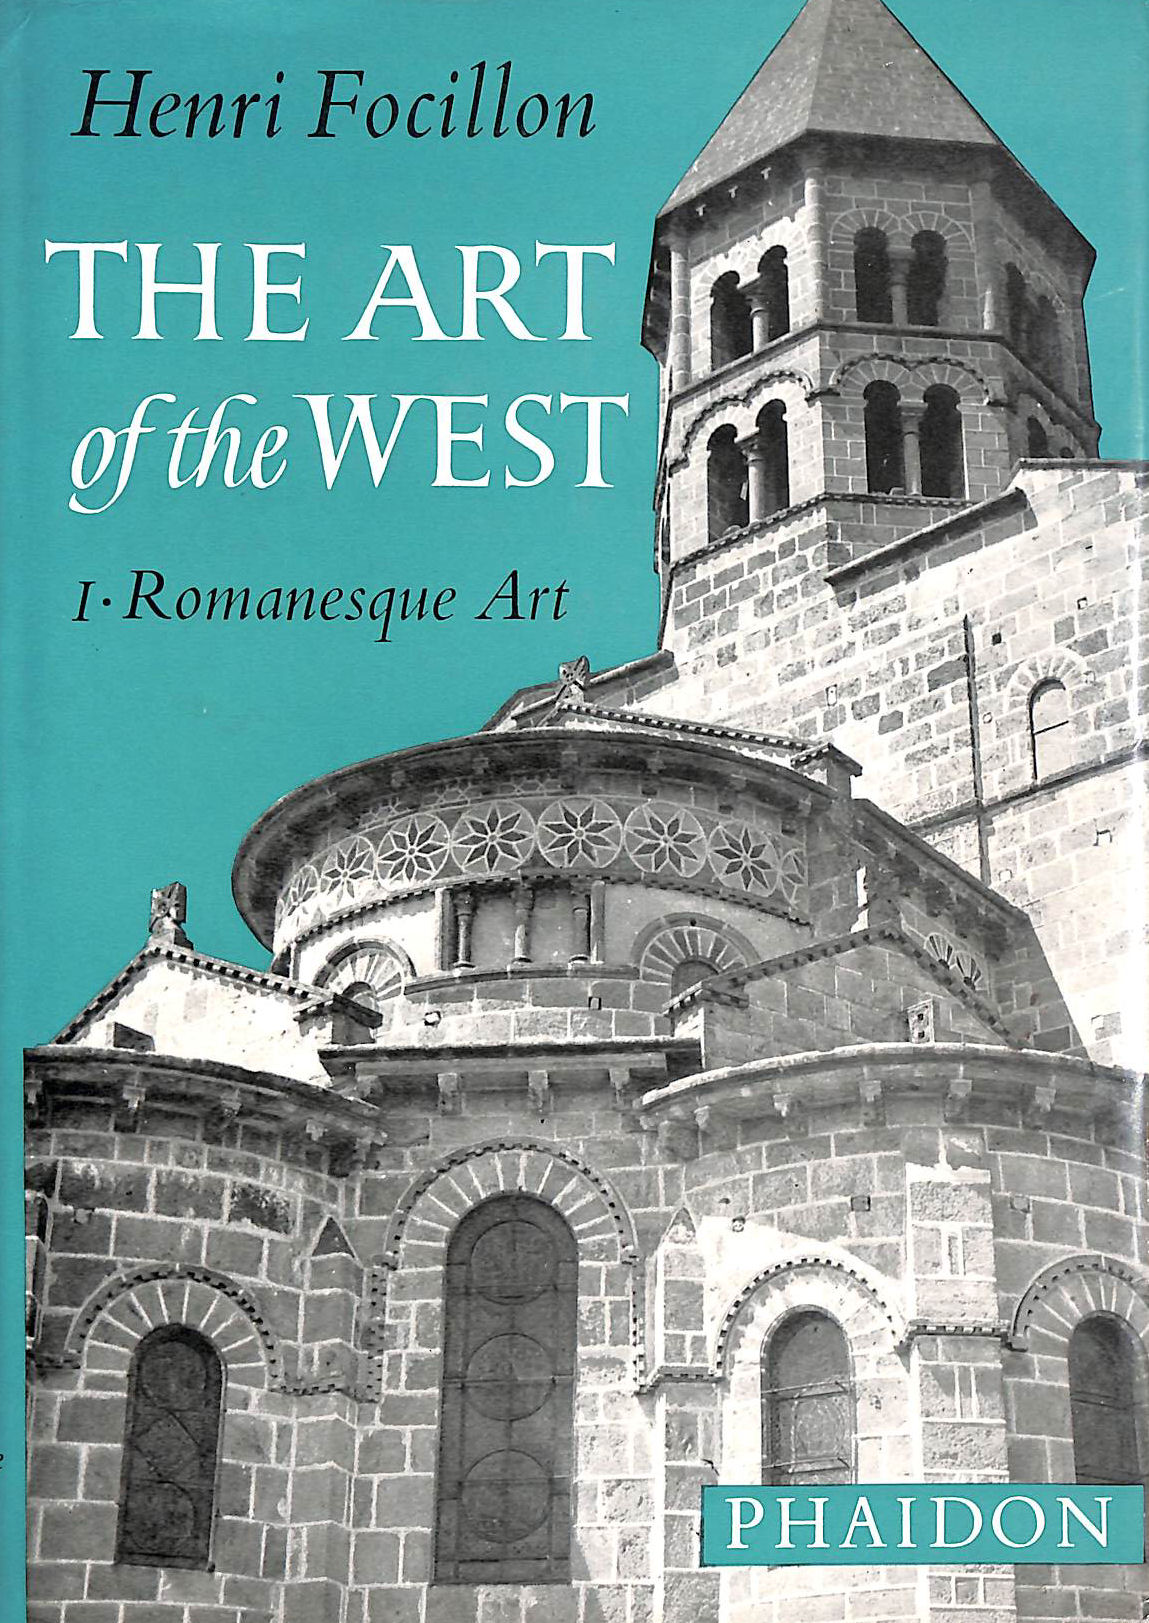 FOCILLON, HENRI; BONY, JEAN [EDITOR]; KING, D. [TRANSLATOR]; - The Art of the West in the Middle Ages - Volume I: Romanesque Art